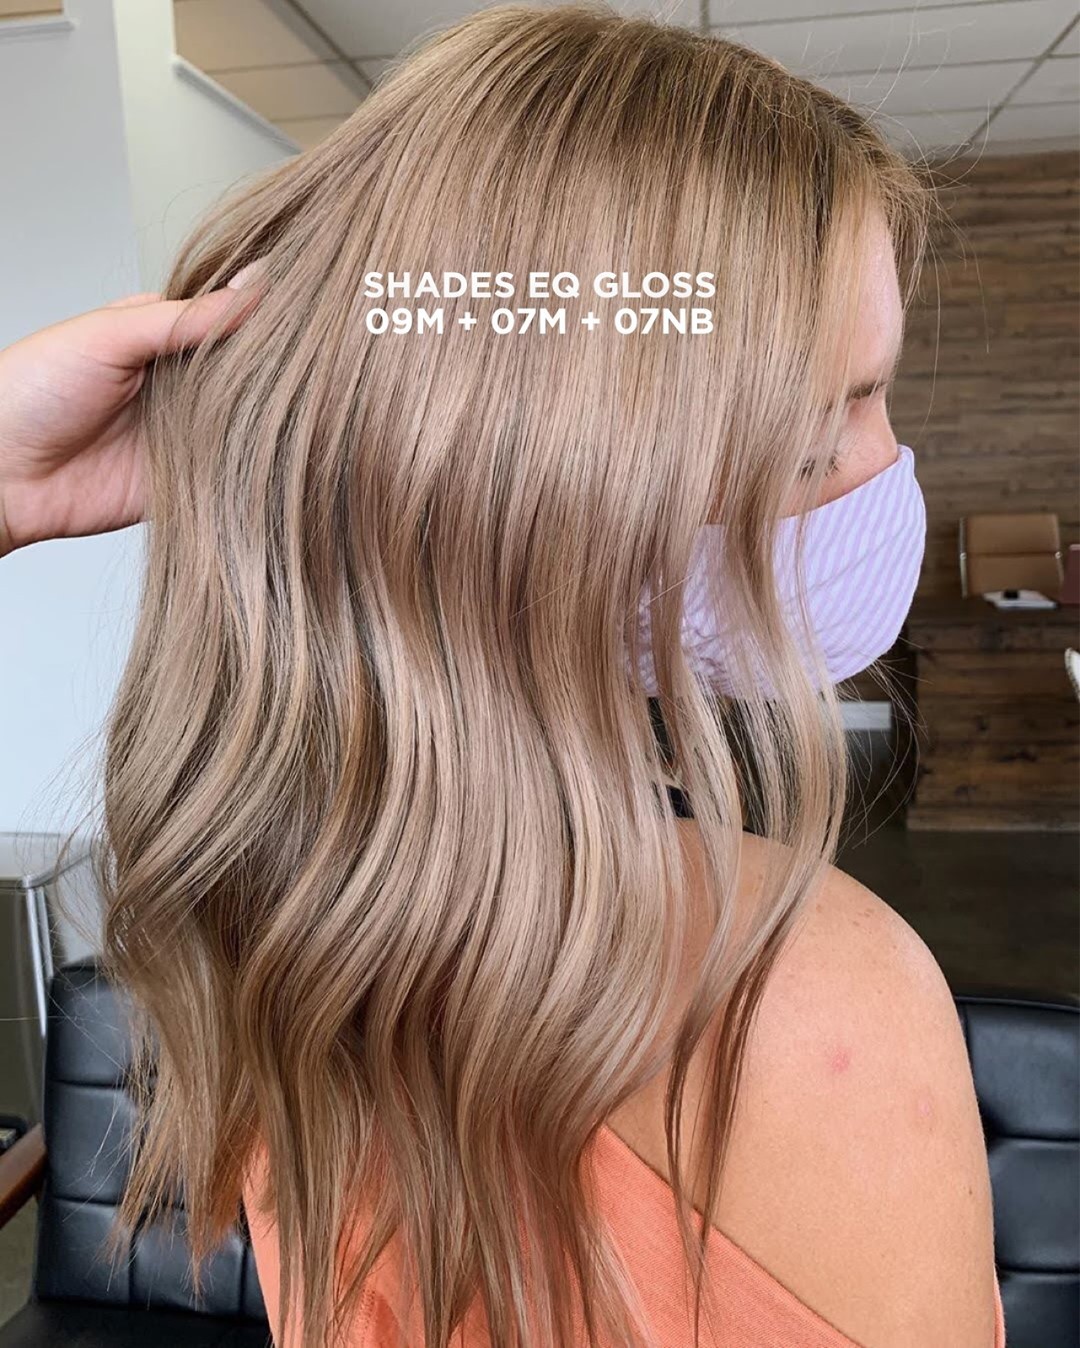 Redken - "The Shades EQ M's are a lifesaver!" - @sydneydelanaaa 🇺🇸 
 
The Shades EQ Matte family of 4 (levels 2, 4, 7 & 9) have a brown to tan background and blue/green reflect and were inspired by co...